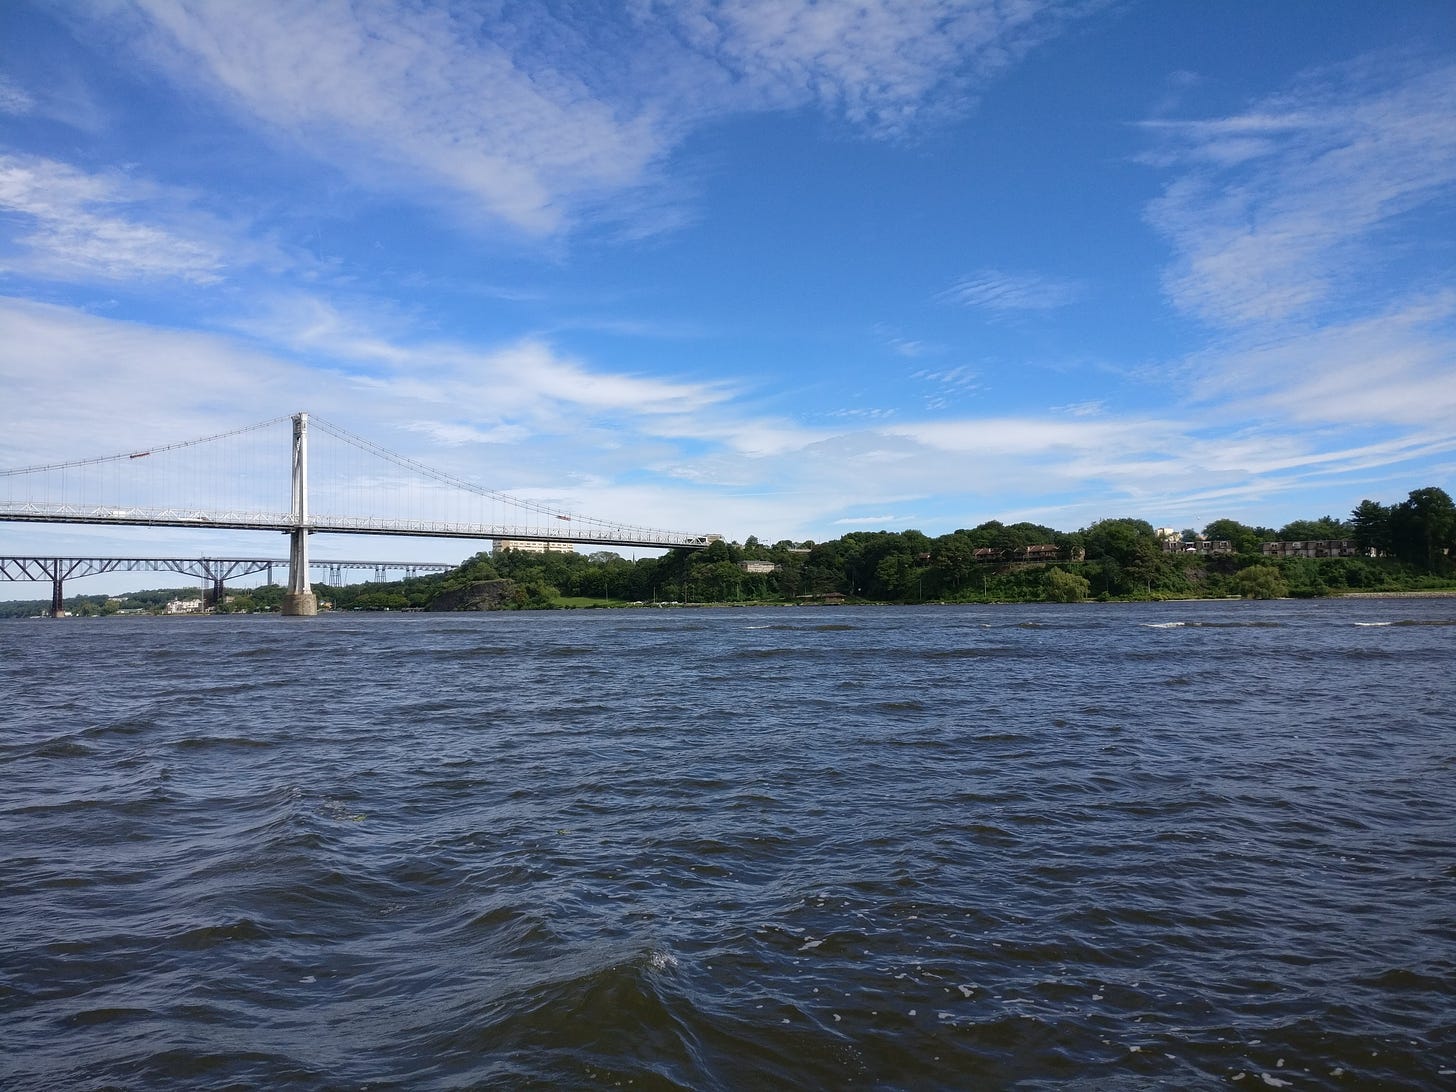 A picture of the two bridges in Poughkeepsie taken from the water. You can see we're in the middle of the river and the shoreline is just a line of indistinct greenery